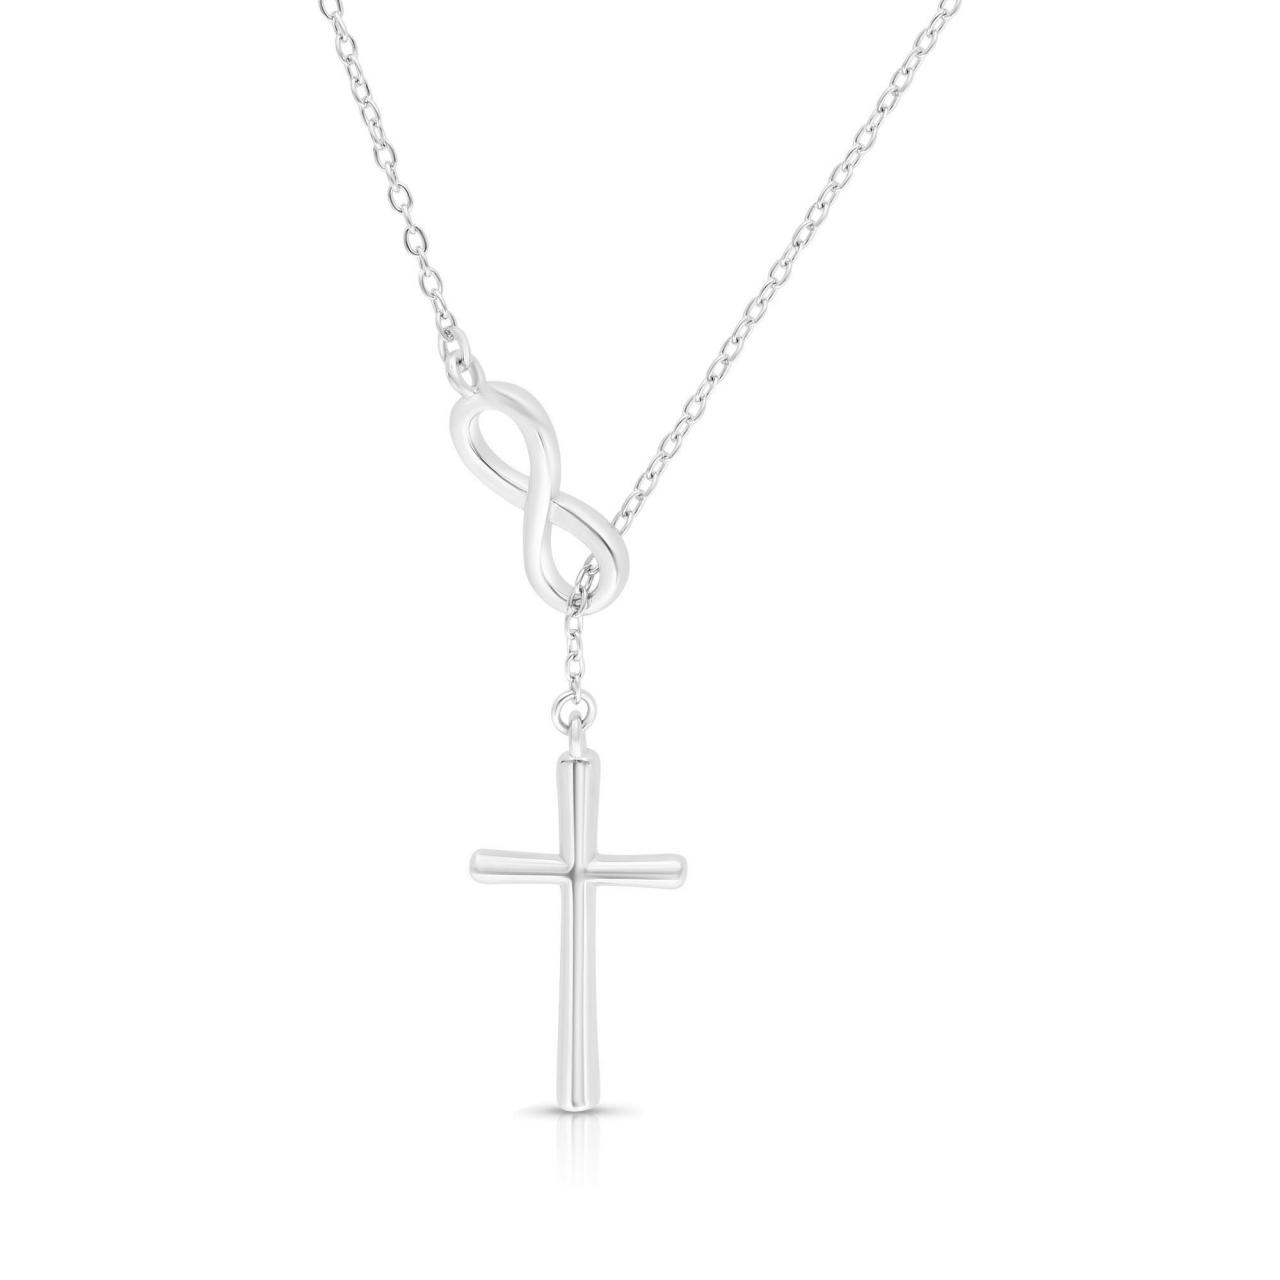 Sterling Silver Cross And Infinity Necklace, Infinity Cross Lariat, Faith Forever Necklace, Crucifix Necklace, Religious Jewelry, Spiritual